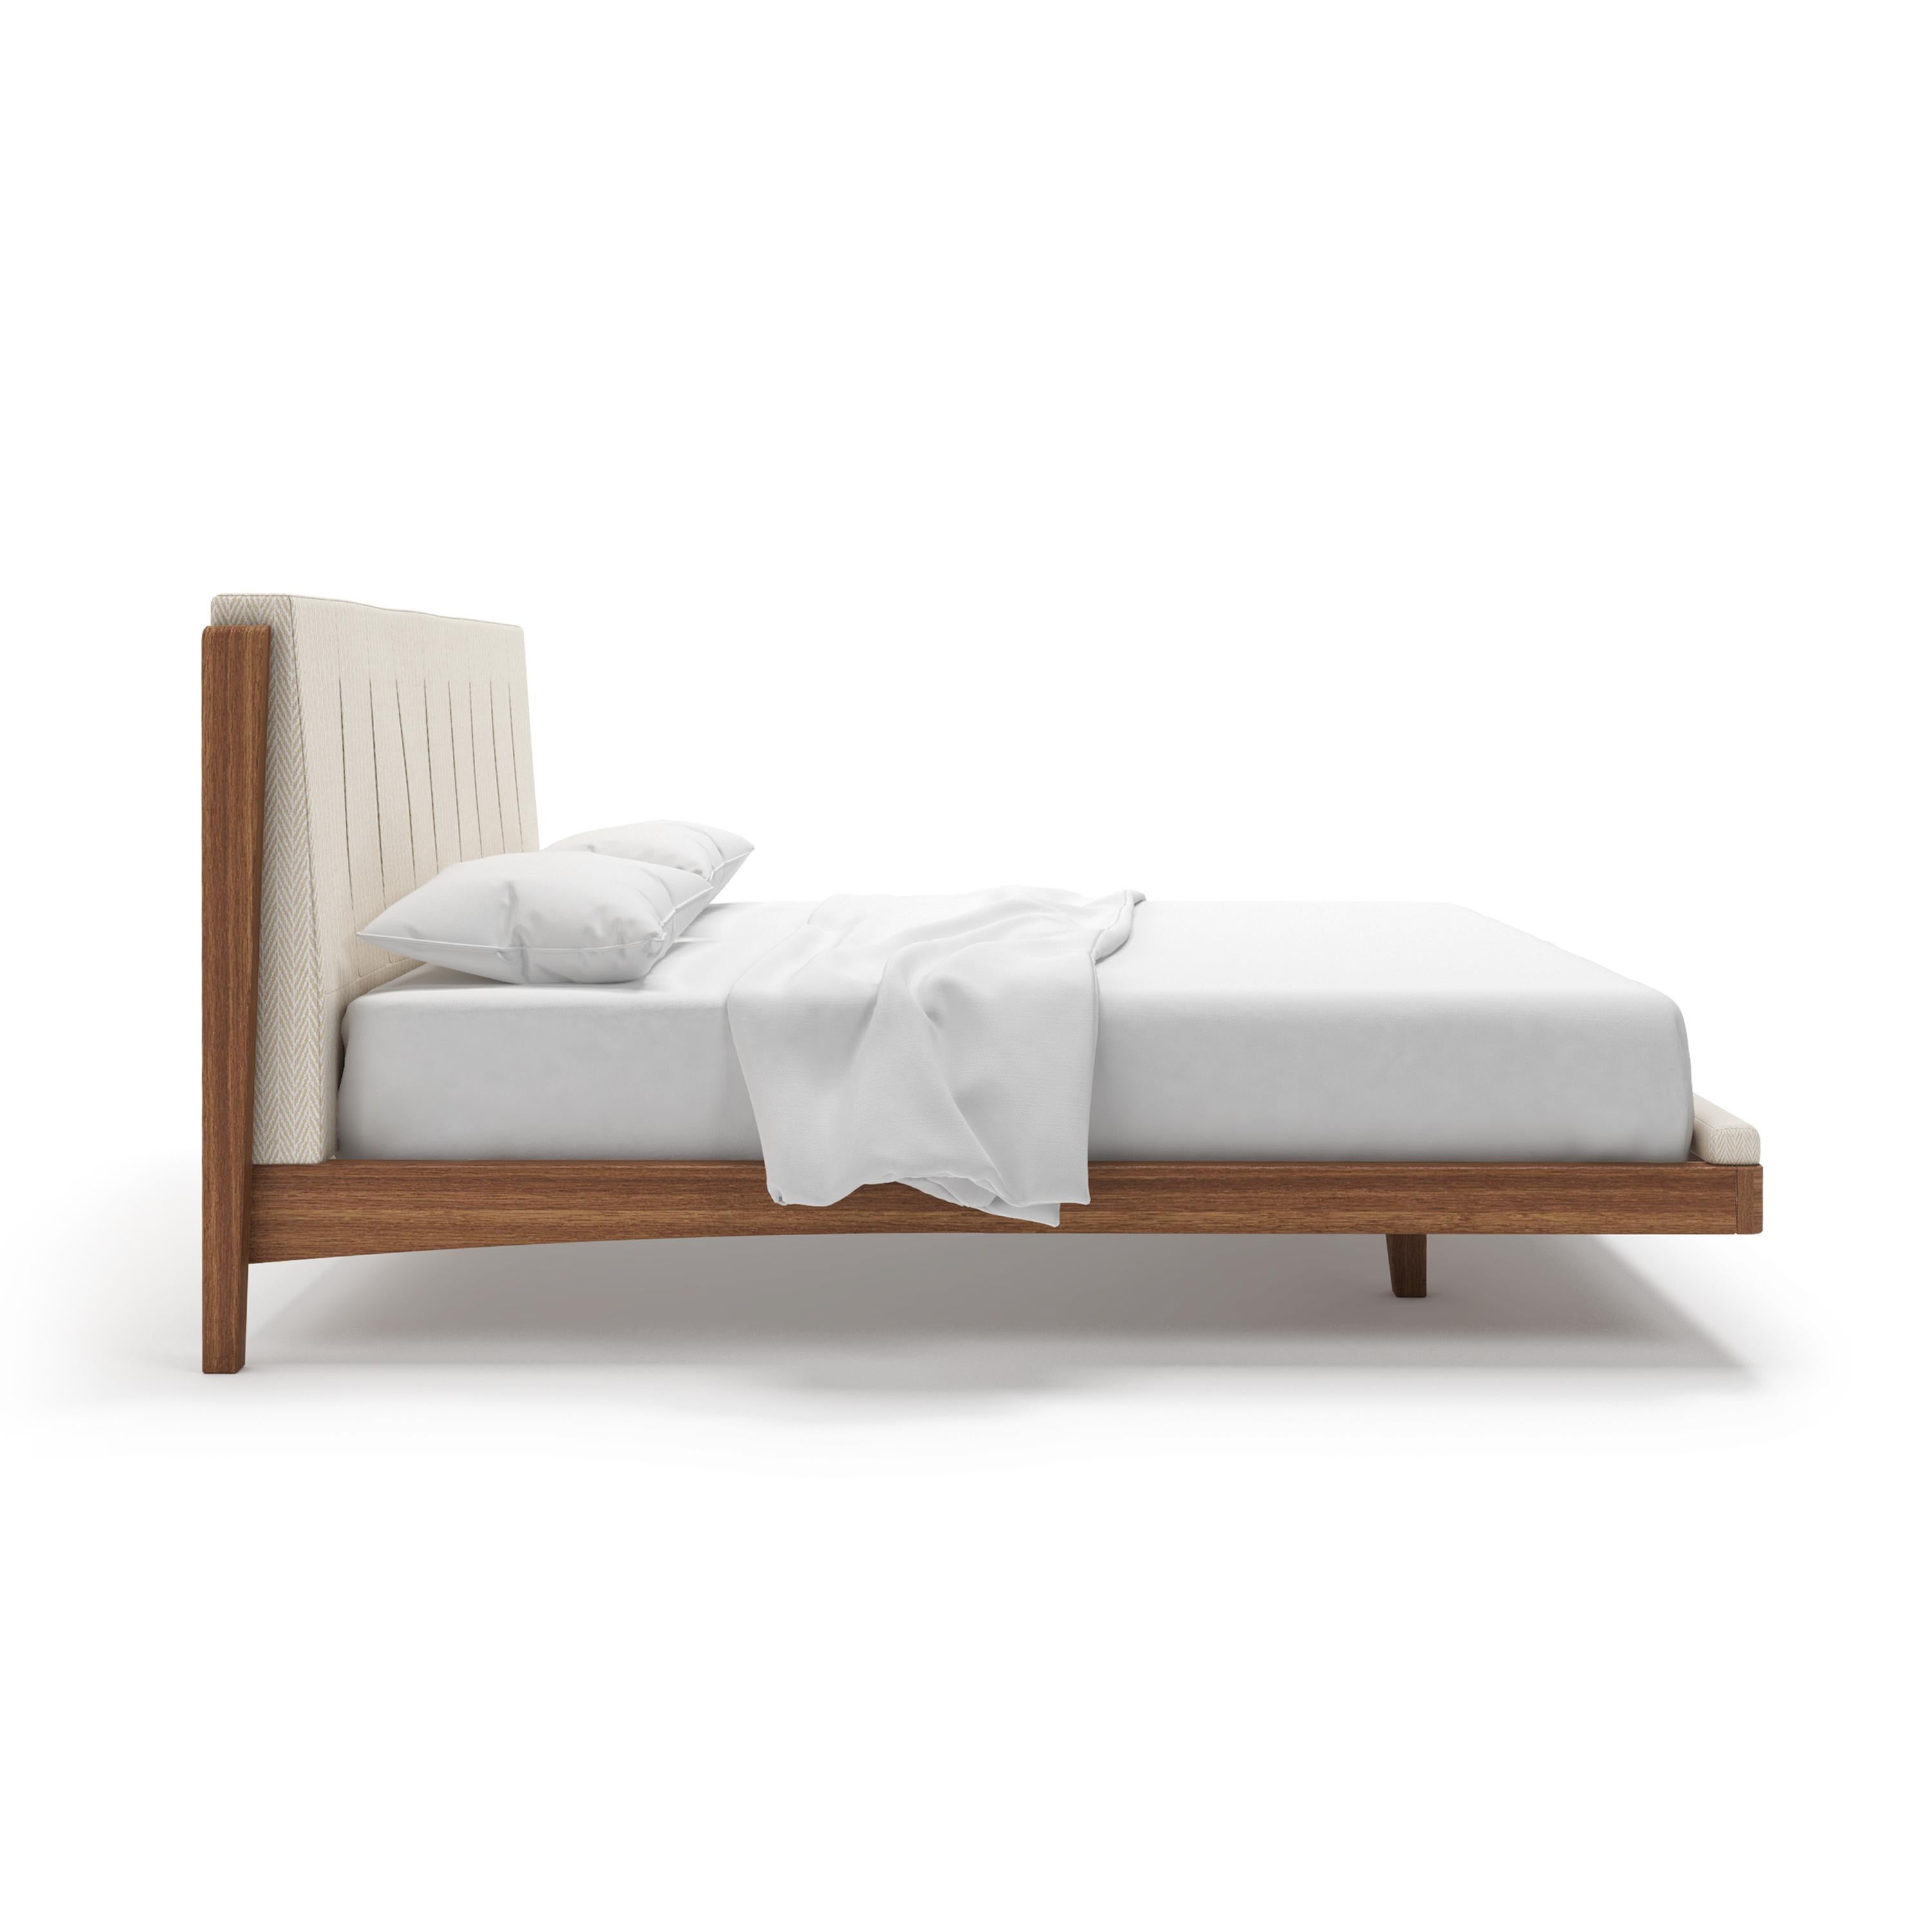 Country Talvi Teak Bed For Sale